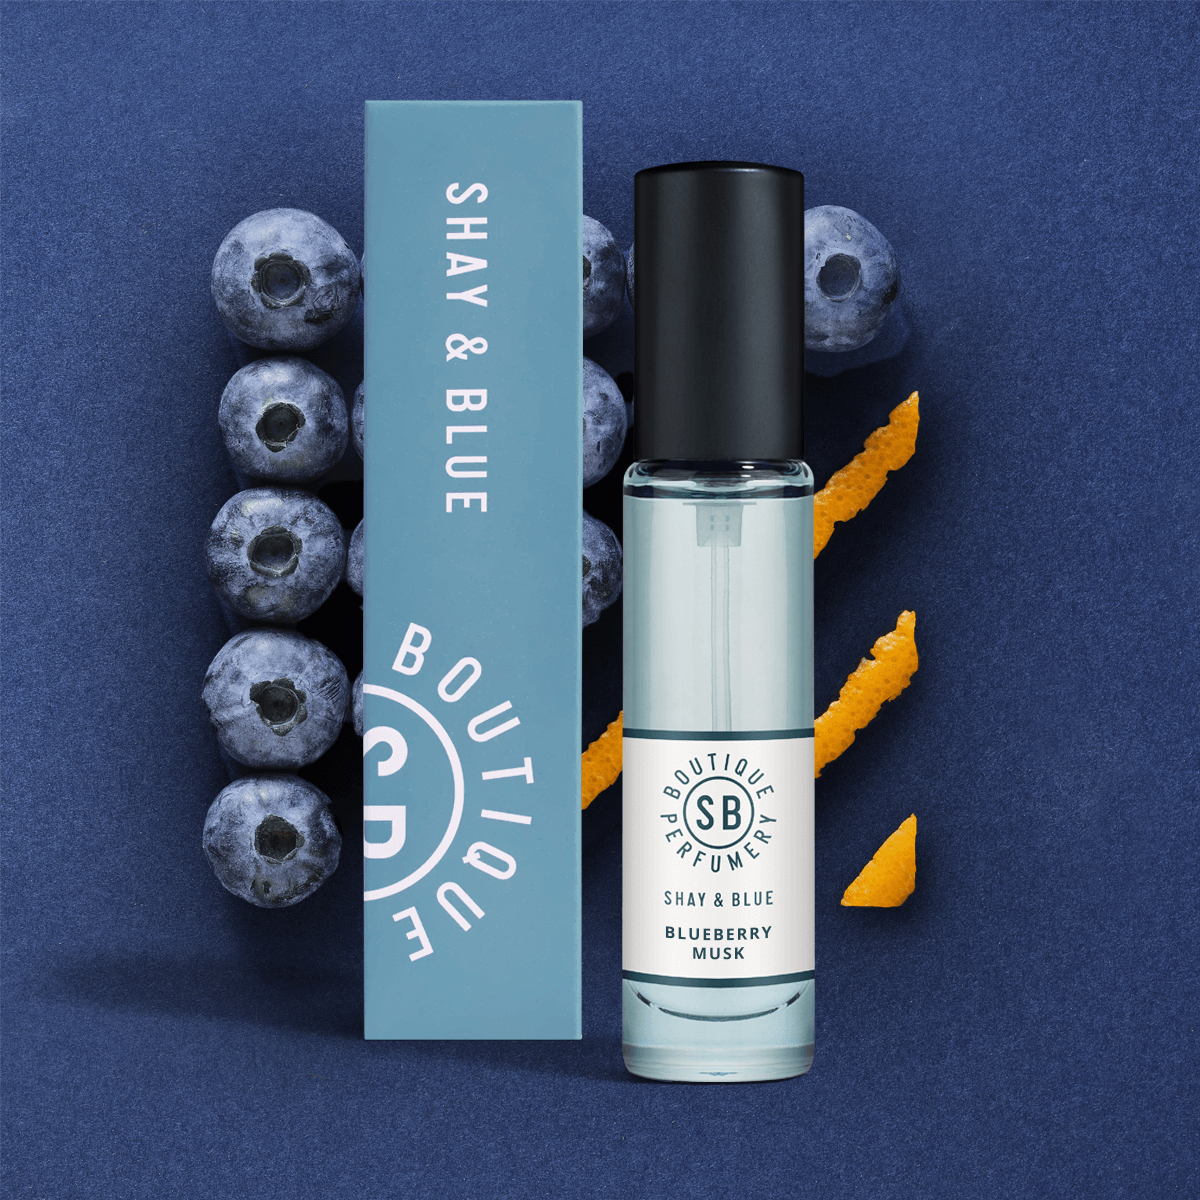 Blueberry Musk Fragrance 10ml | Soft blueberry & orange blossom fused with magnolia and silky cashmere. | Clean All Gender Fragrance | Shay & Blue